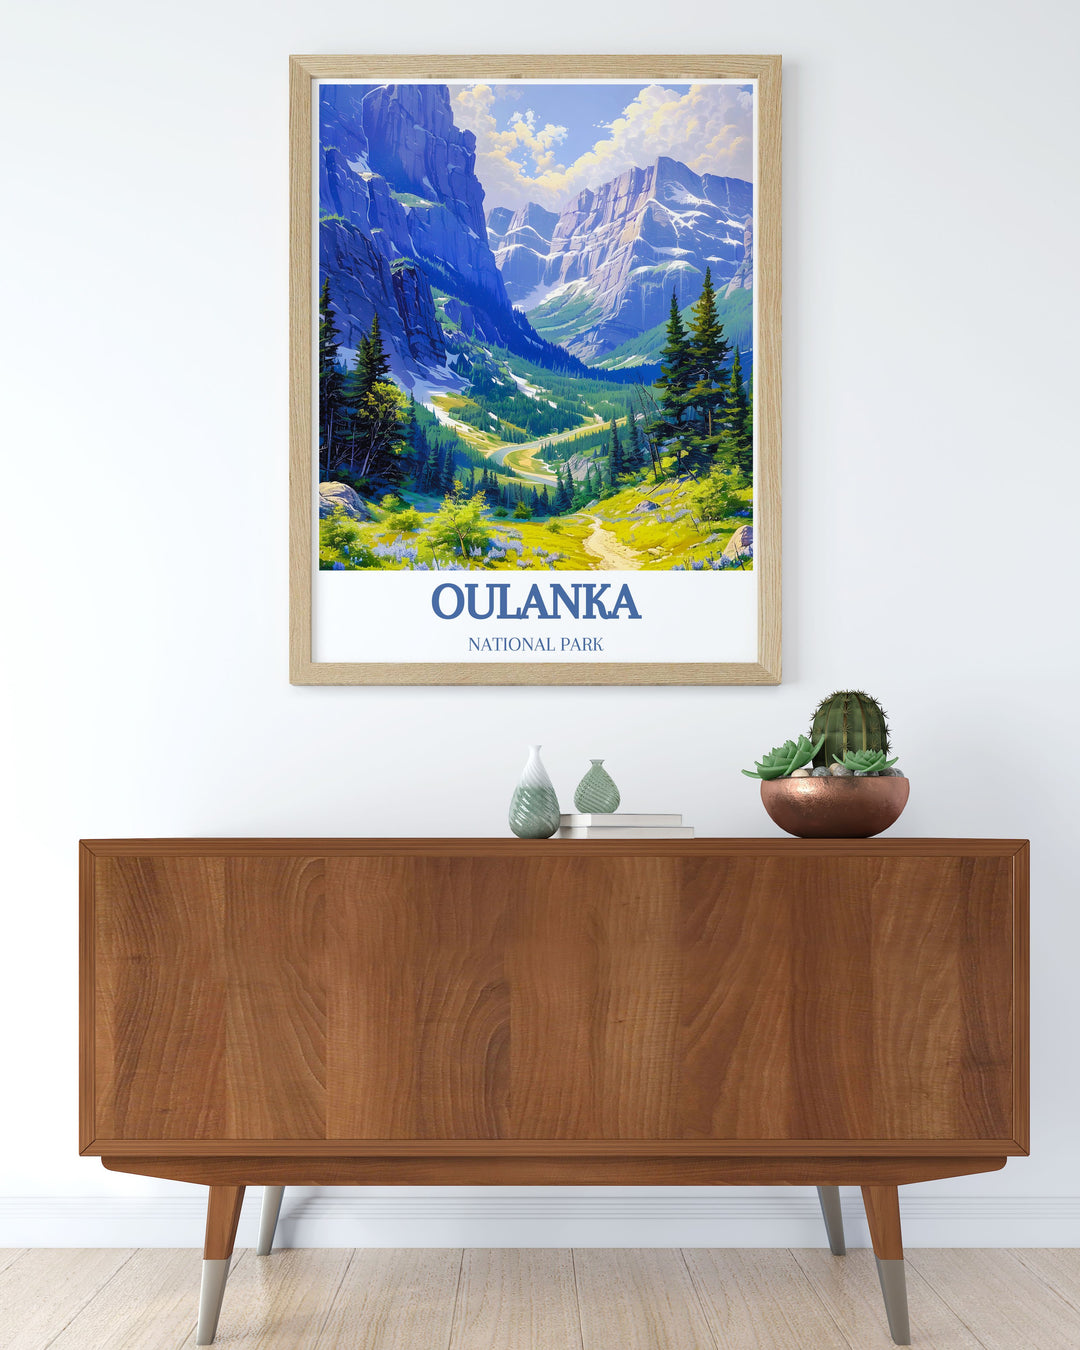 National Park Print of Oulanka Canyon designed to transport viewers to the heart of Oulanka National Park capturing the essence of Finland natural beauty making it an ideal addition to any wall art collection